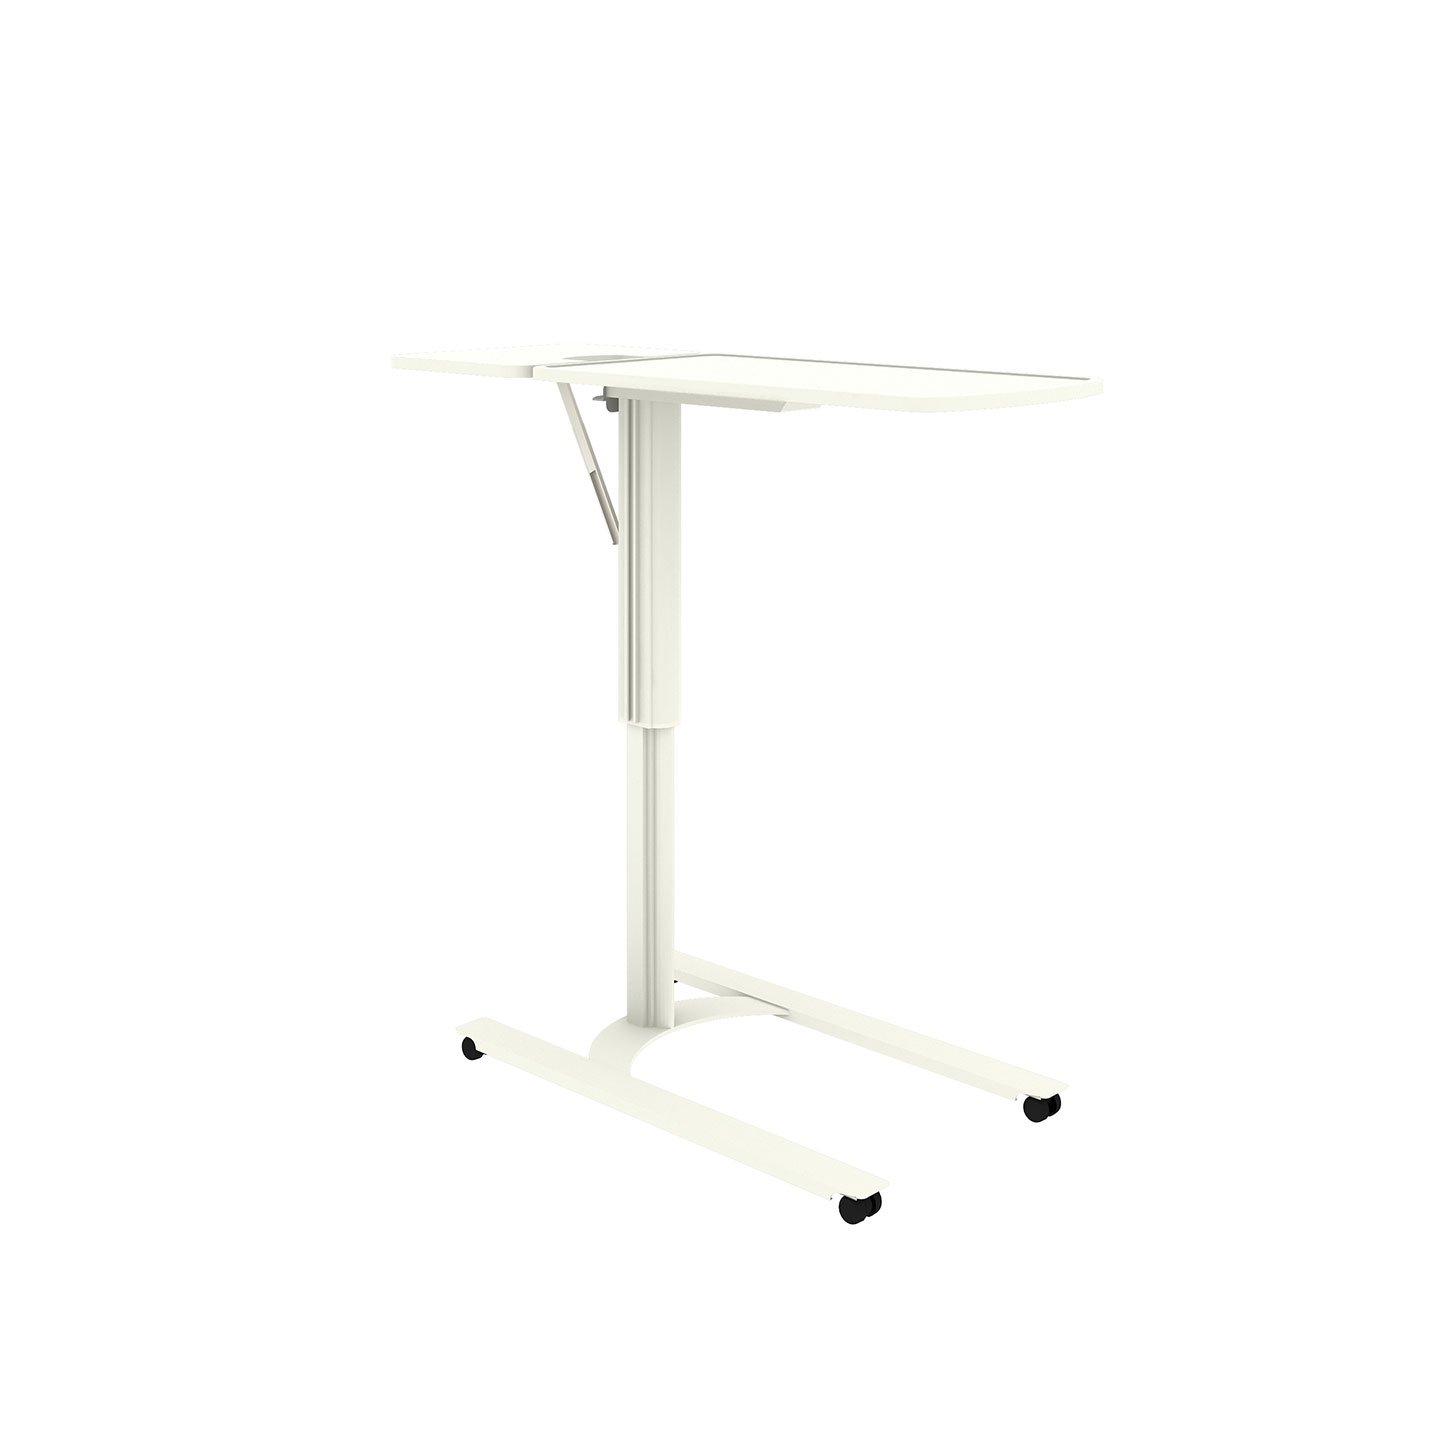 Haworth Overbed Table with white top and heavy steel base with wheels